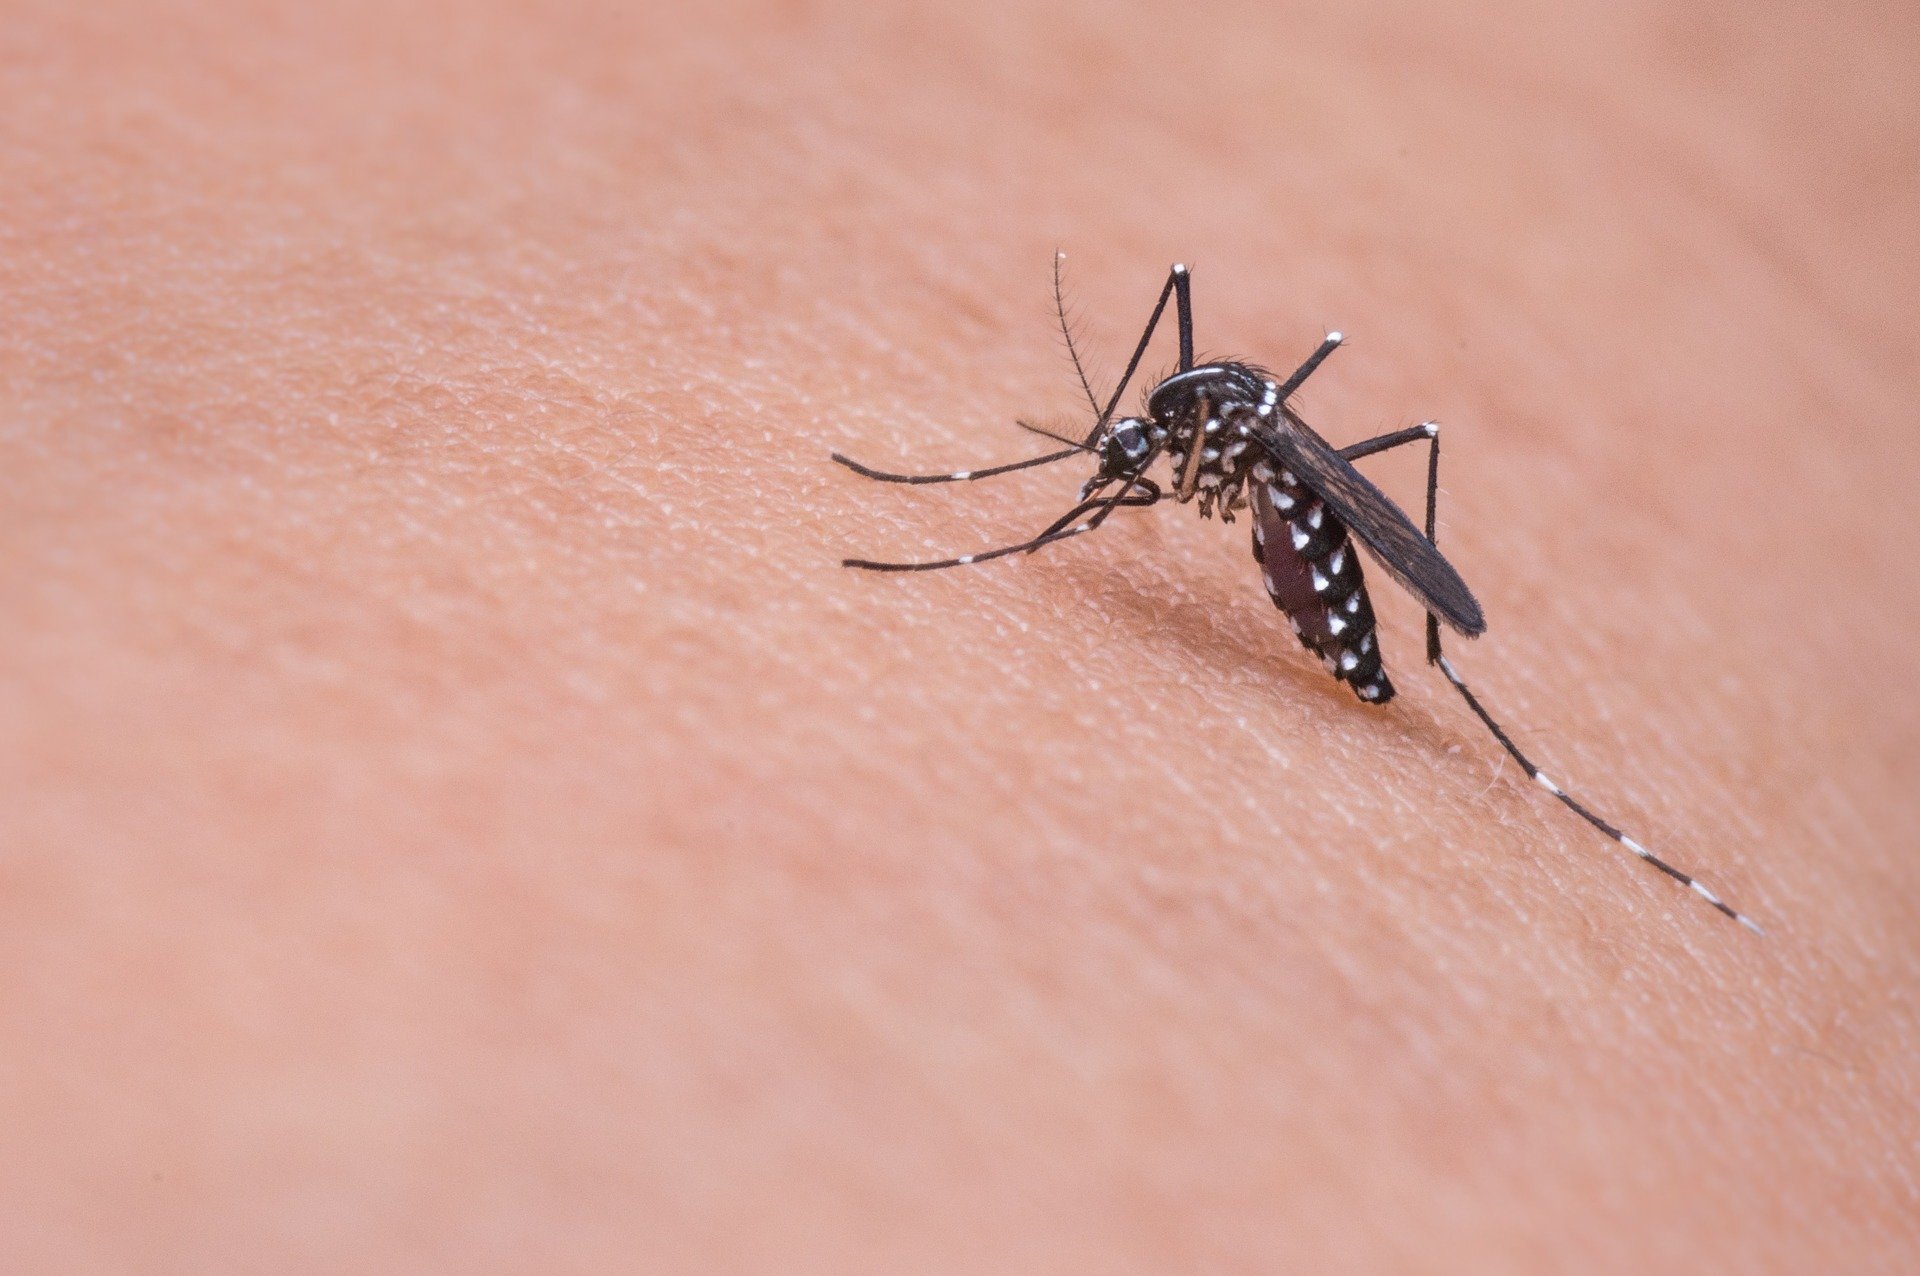 Algorithm shows that under the right conditions, mosquitoes can even flourish in..